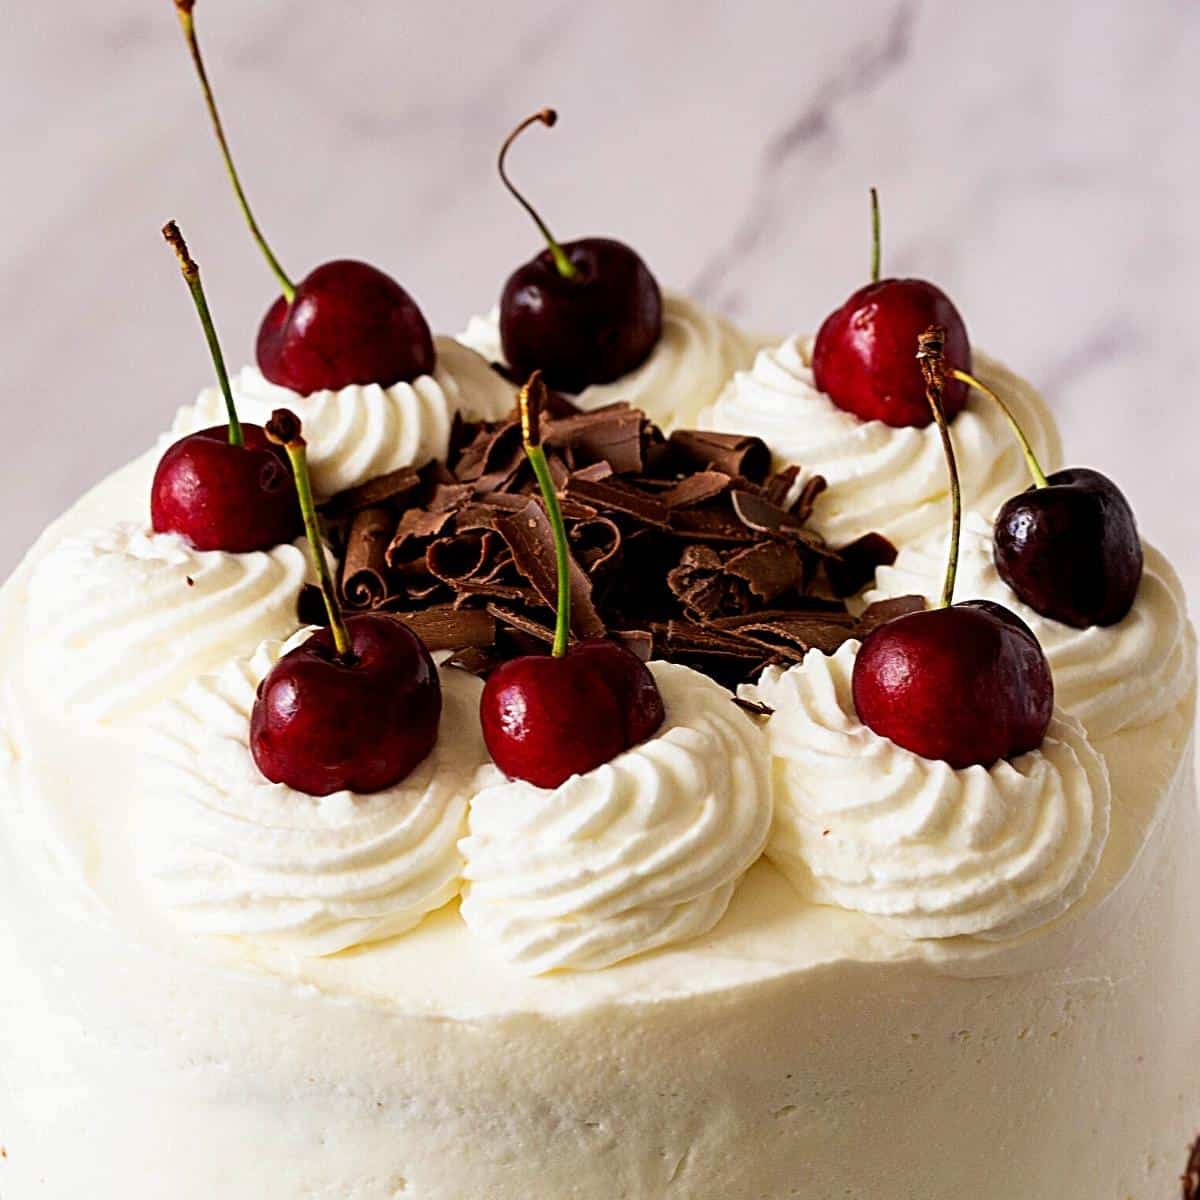 Piped whipped cream swirls on the black forest layer cake.